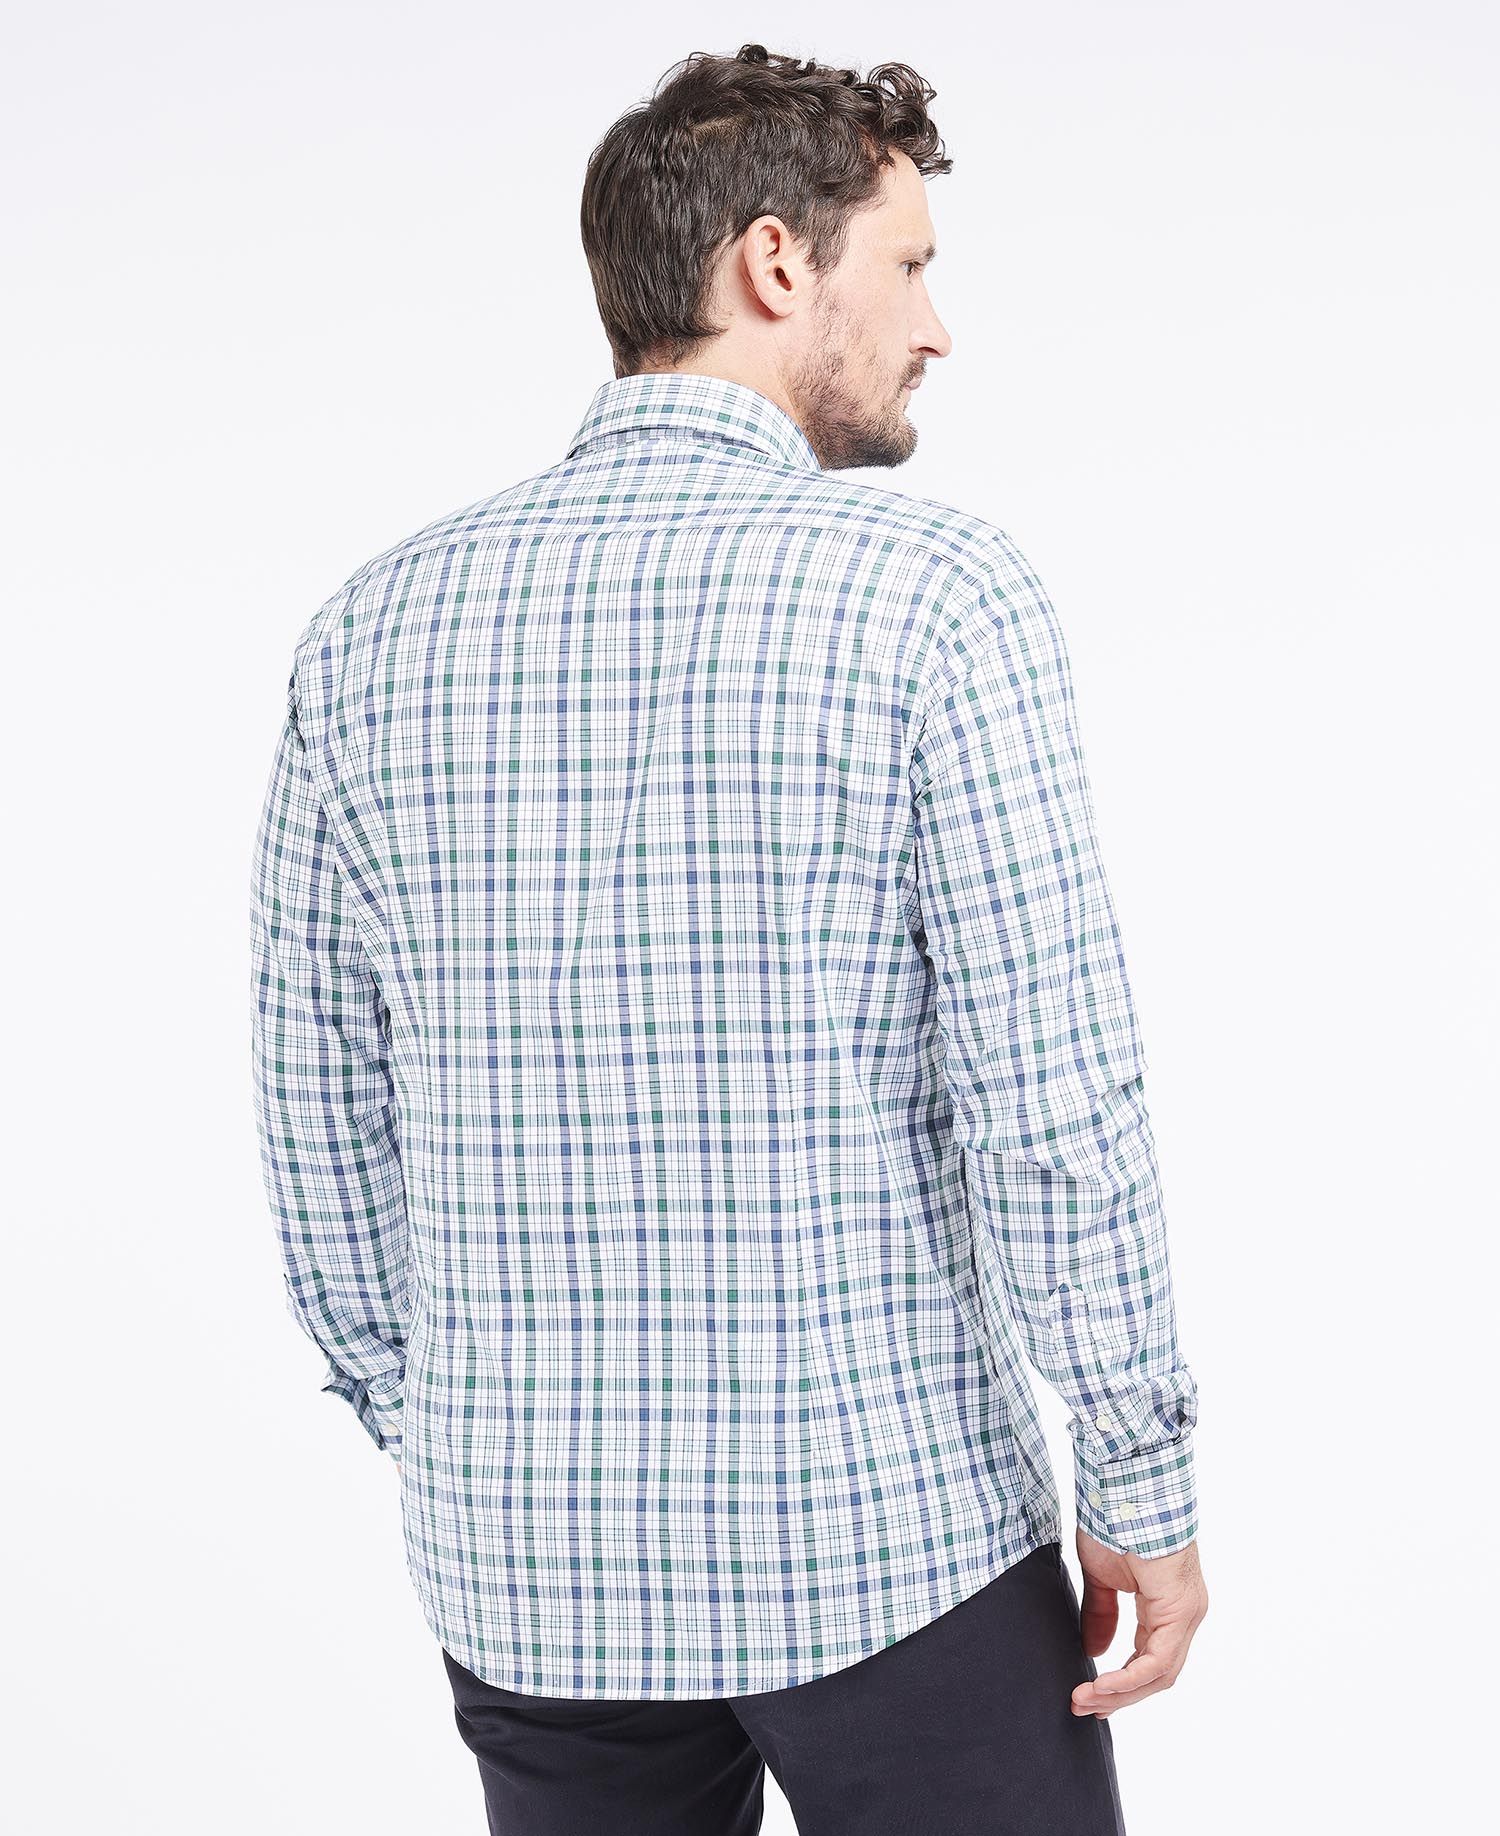 Shop the Barbour Hallhill Performance Shirt here at Barbour. | Barbour